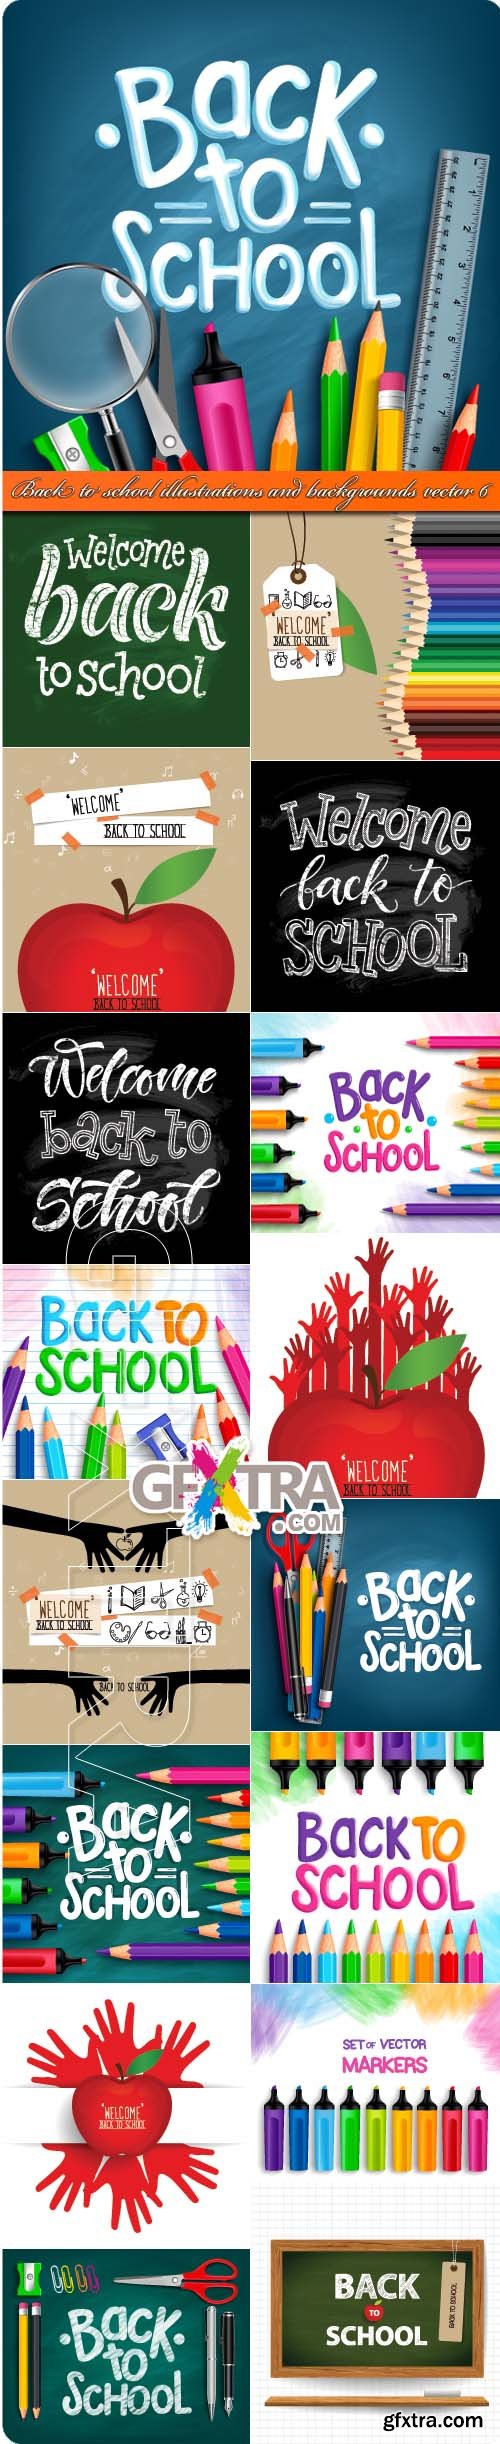 Back to school illustrations and backgrounds vector 6